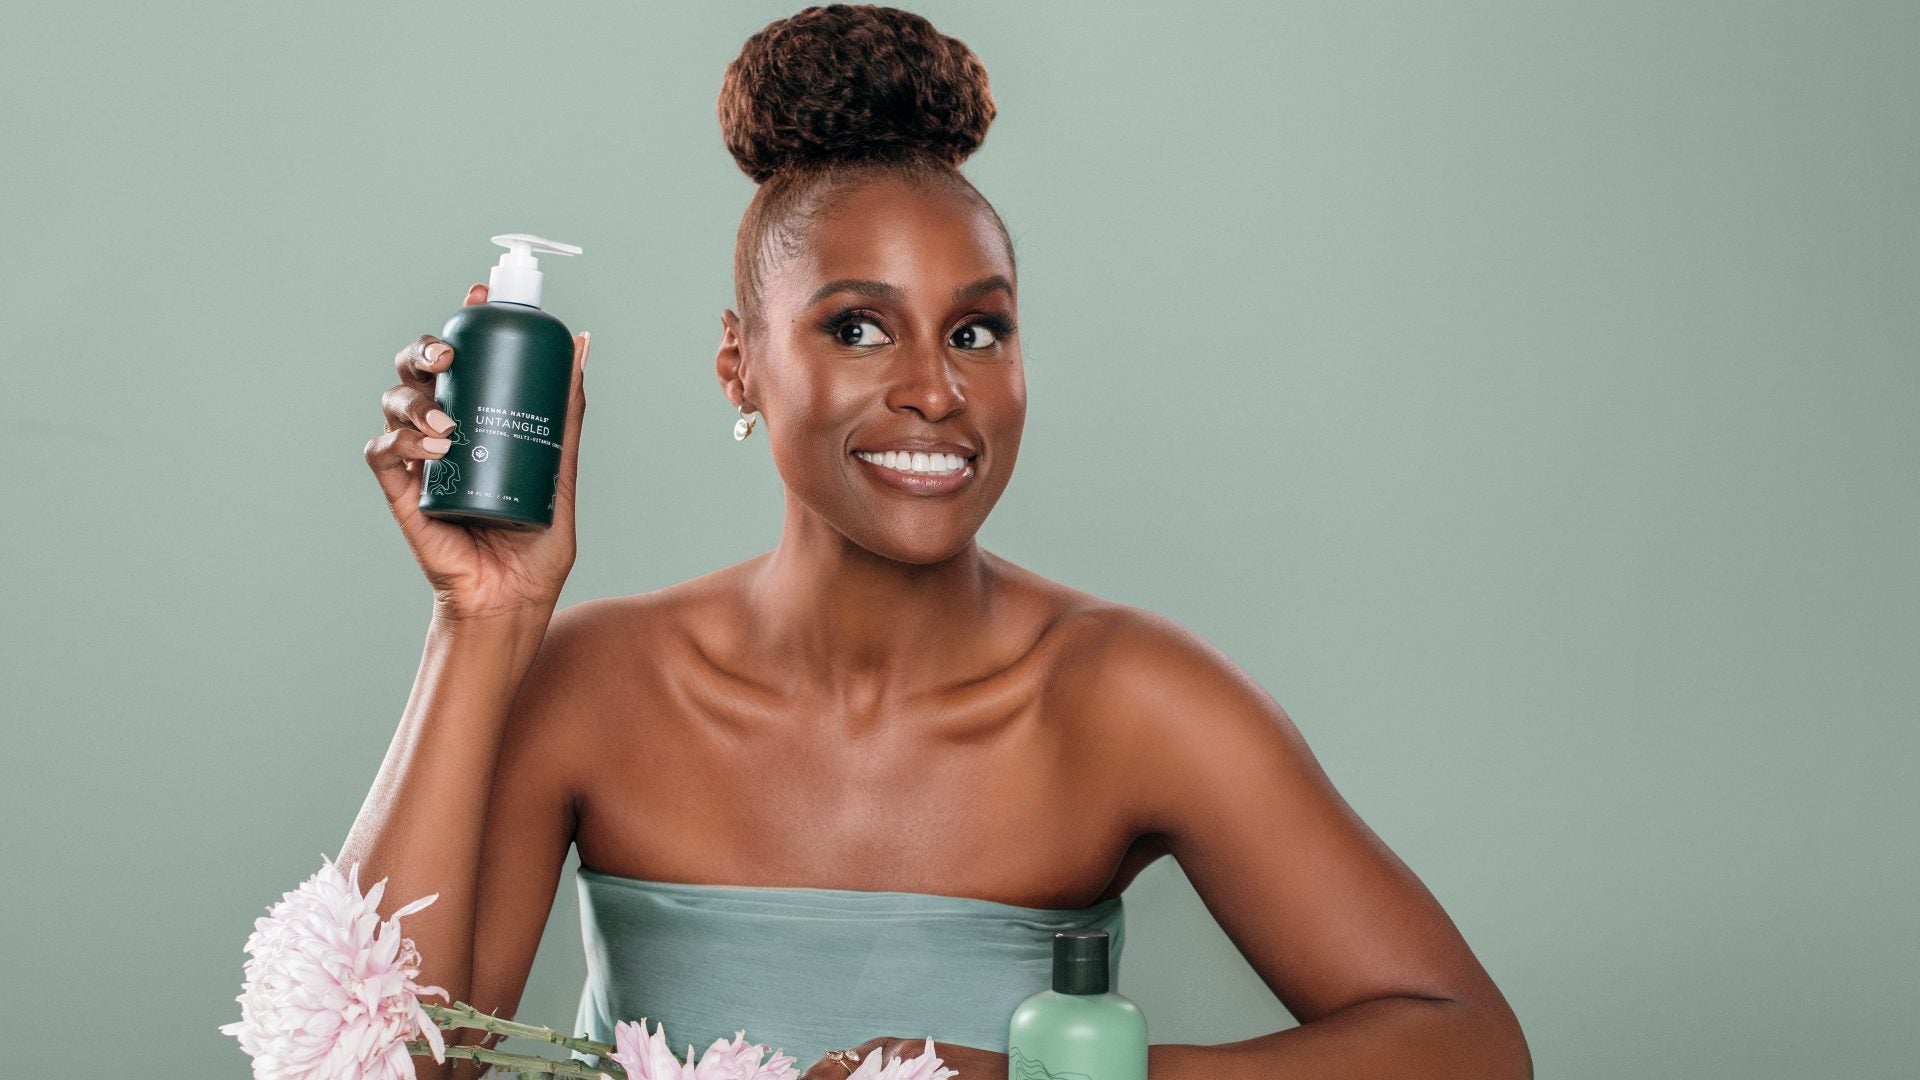 Issa Rae Wants Black-Owned Businesses To Get Certified Through This Partnership Initiative